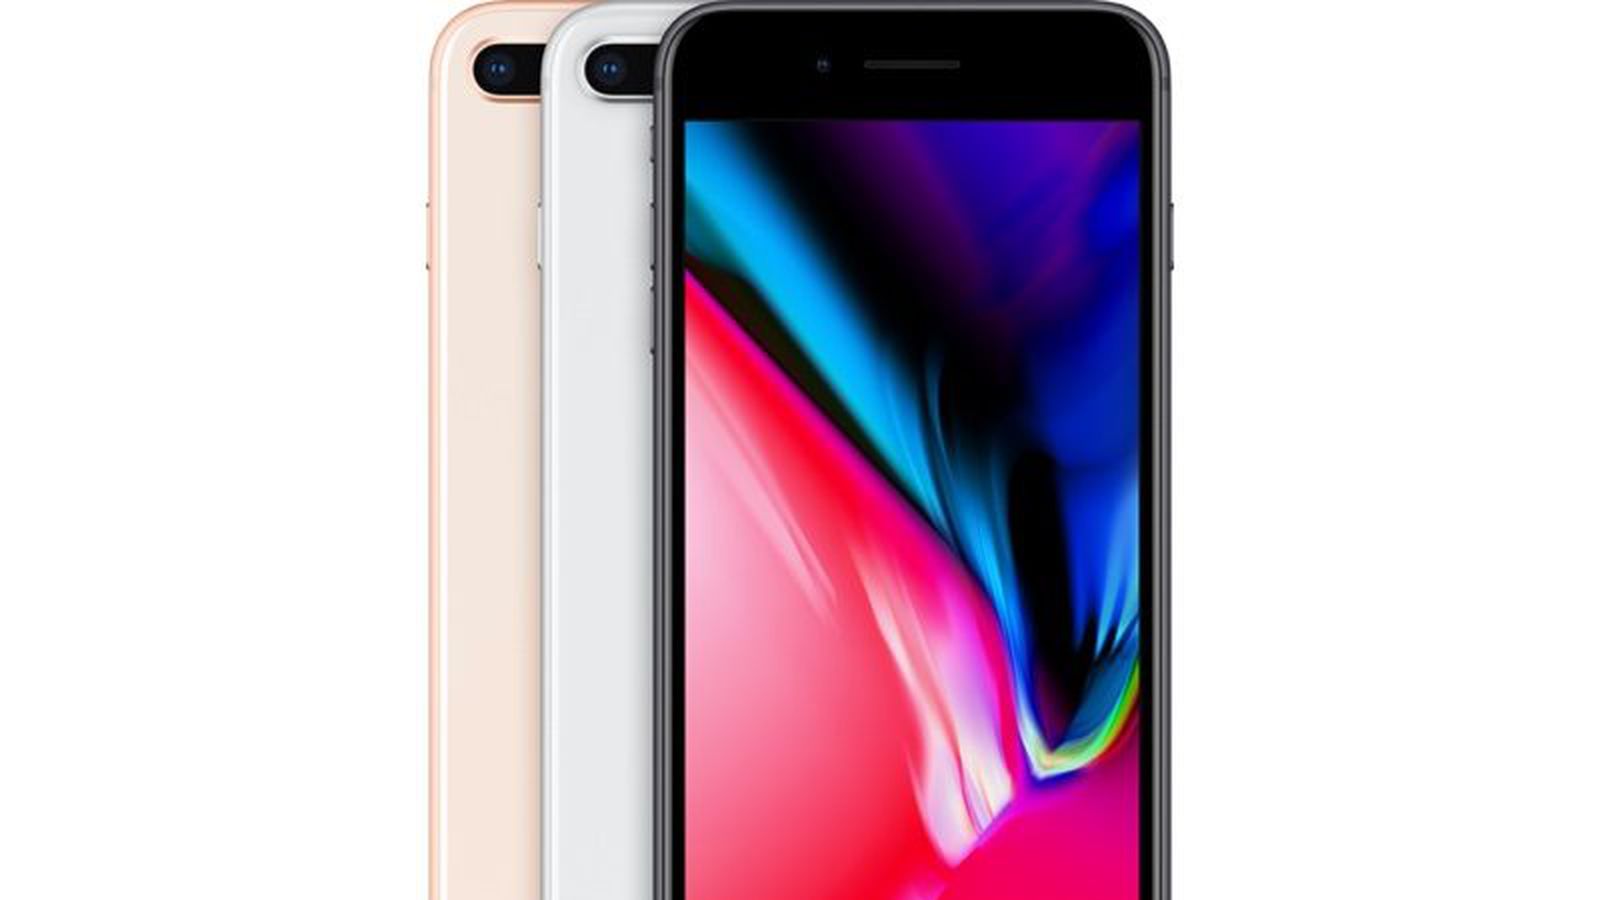 iPhone 8 and iPhone 8 Plus Now Available for Pre-Order - MacRumors